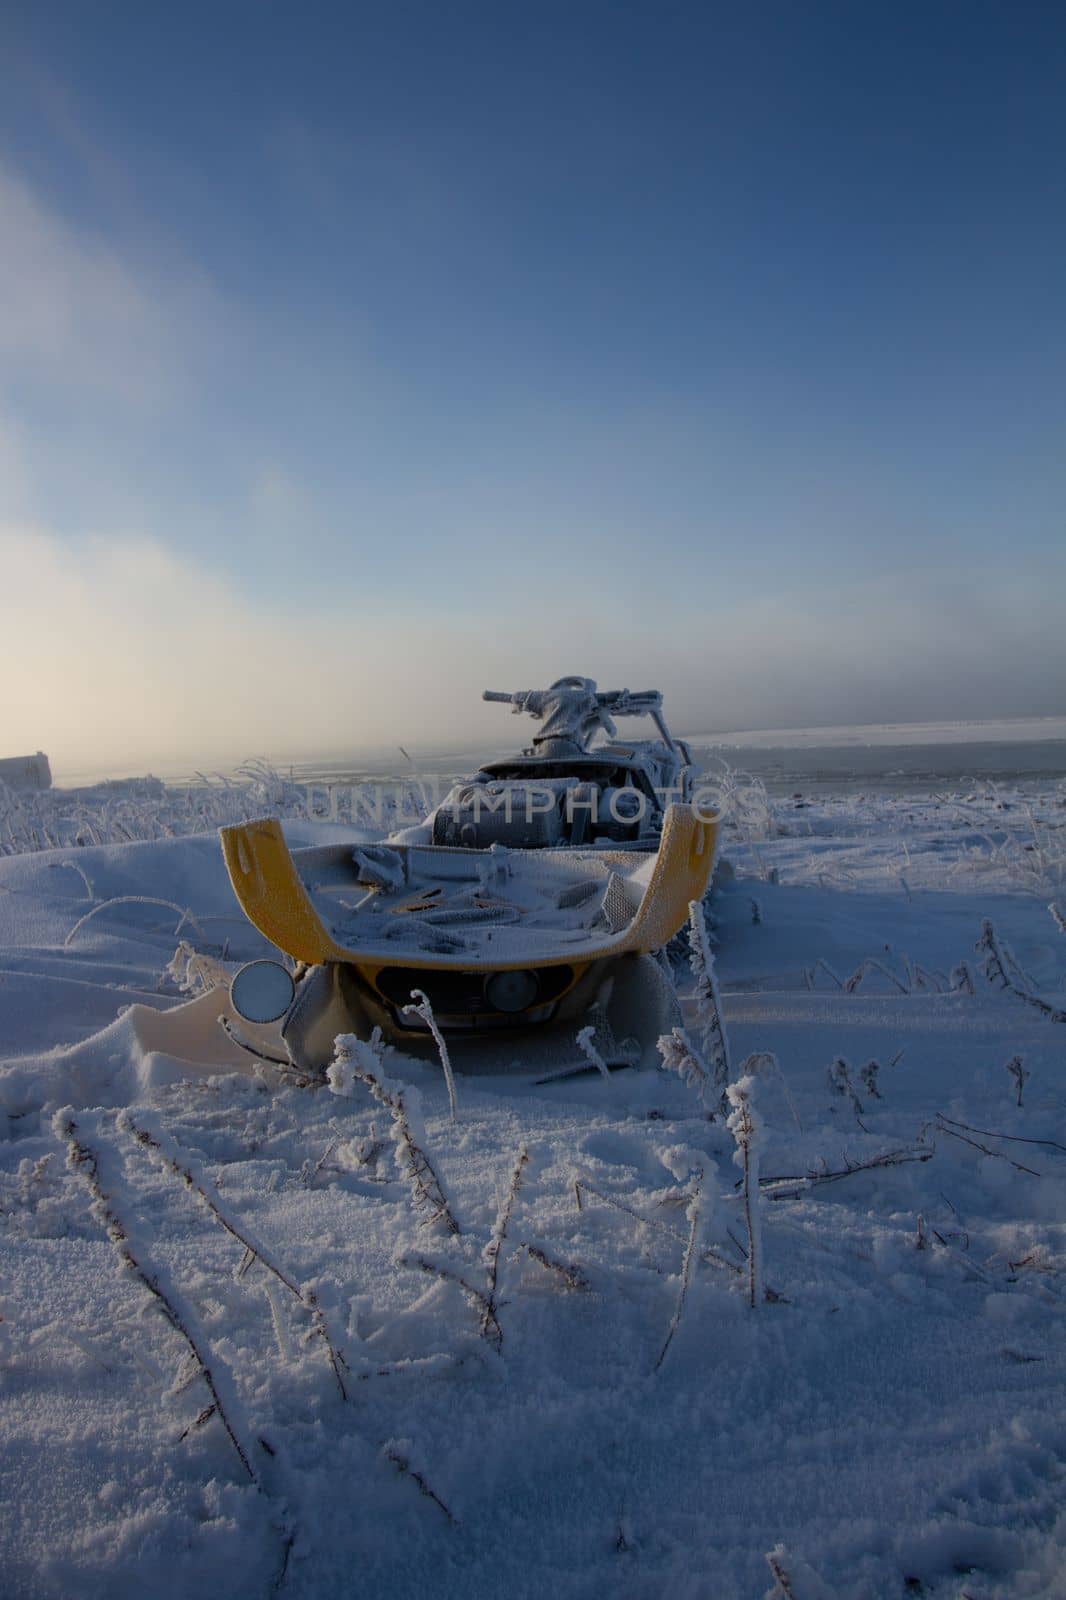 Old snowmobile sitting on a snow covered landscape by Granchinho